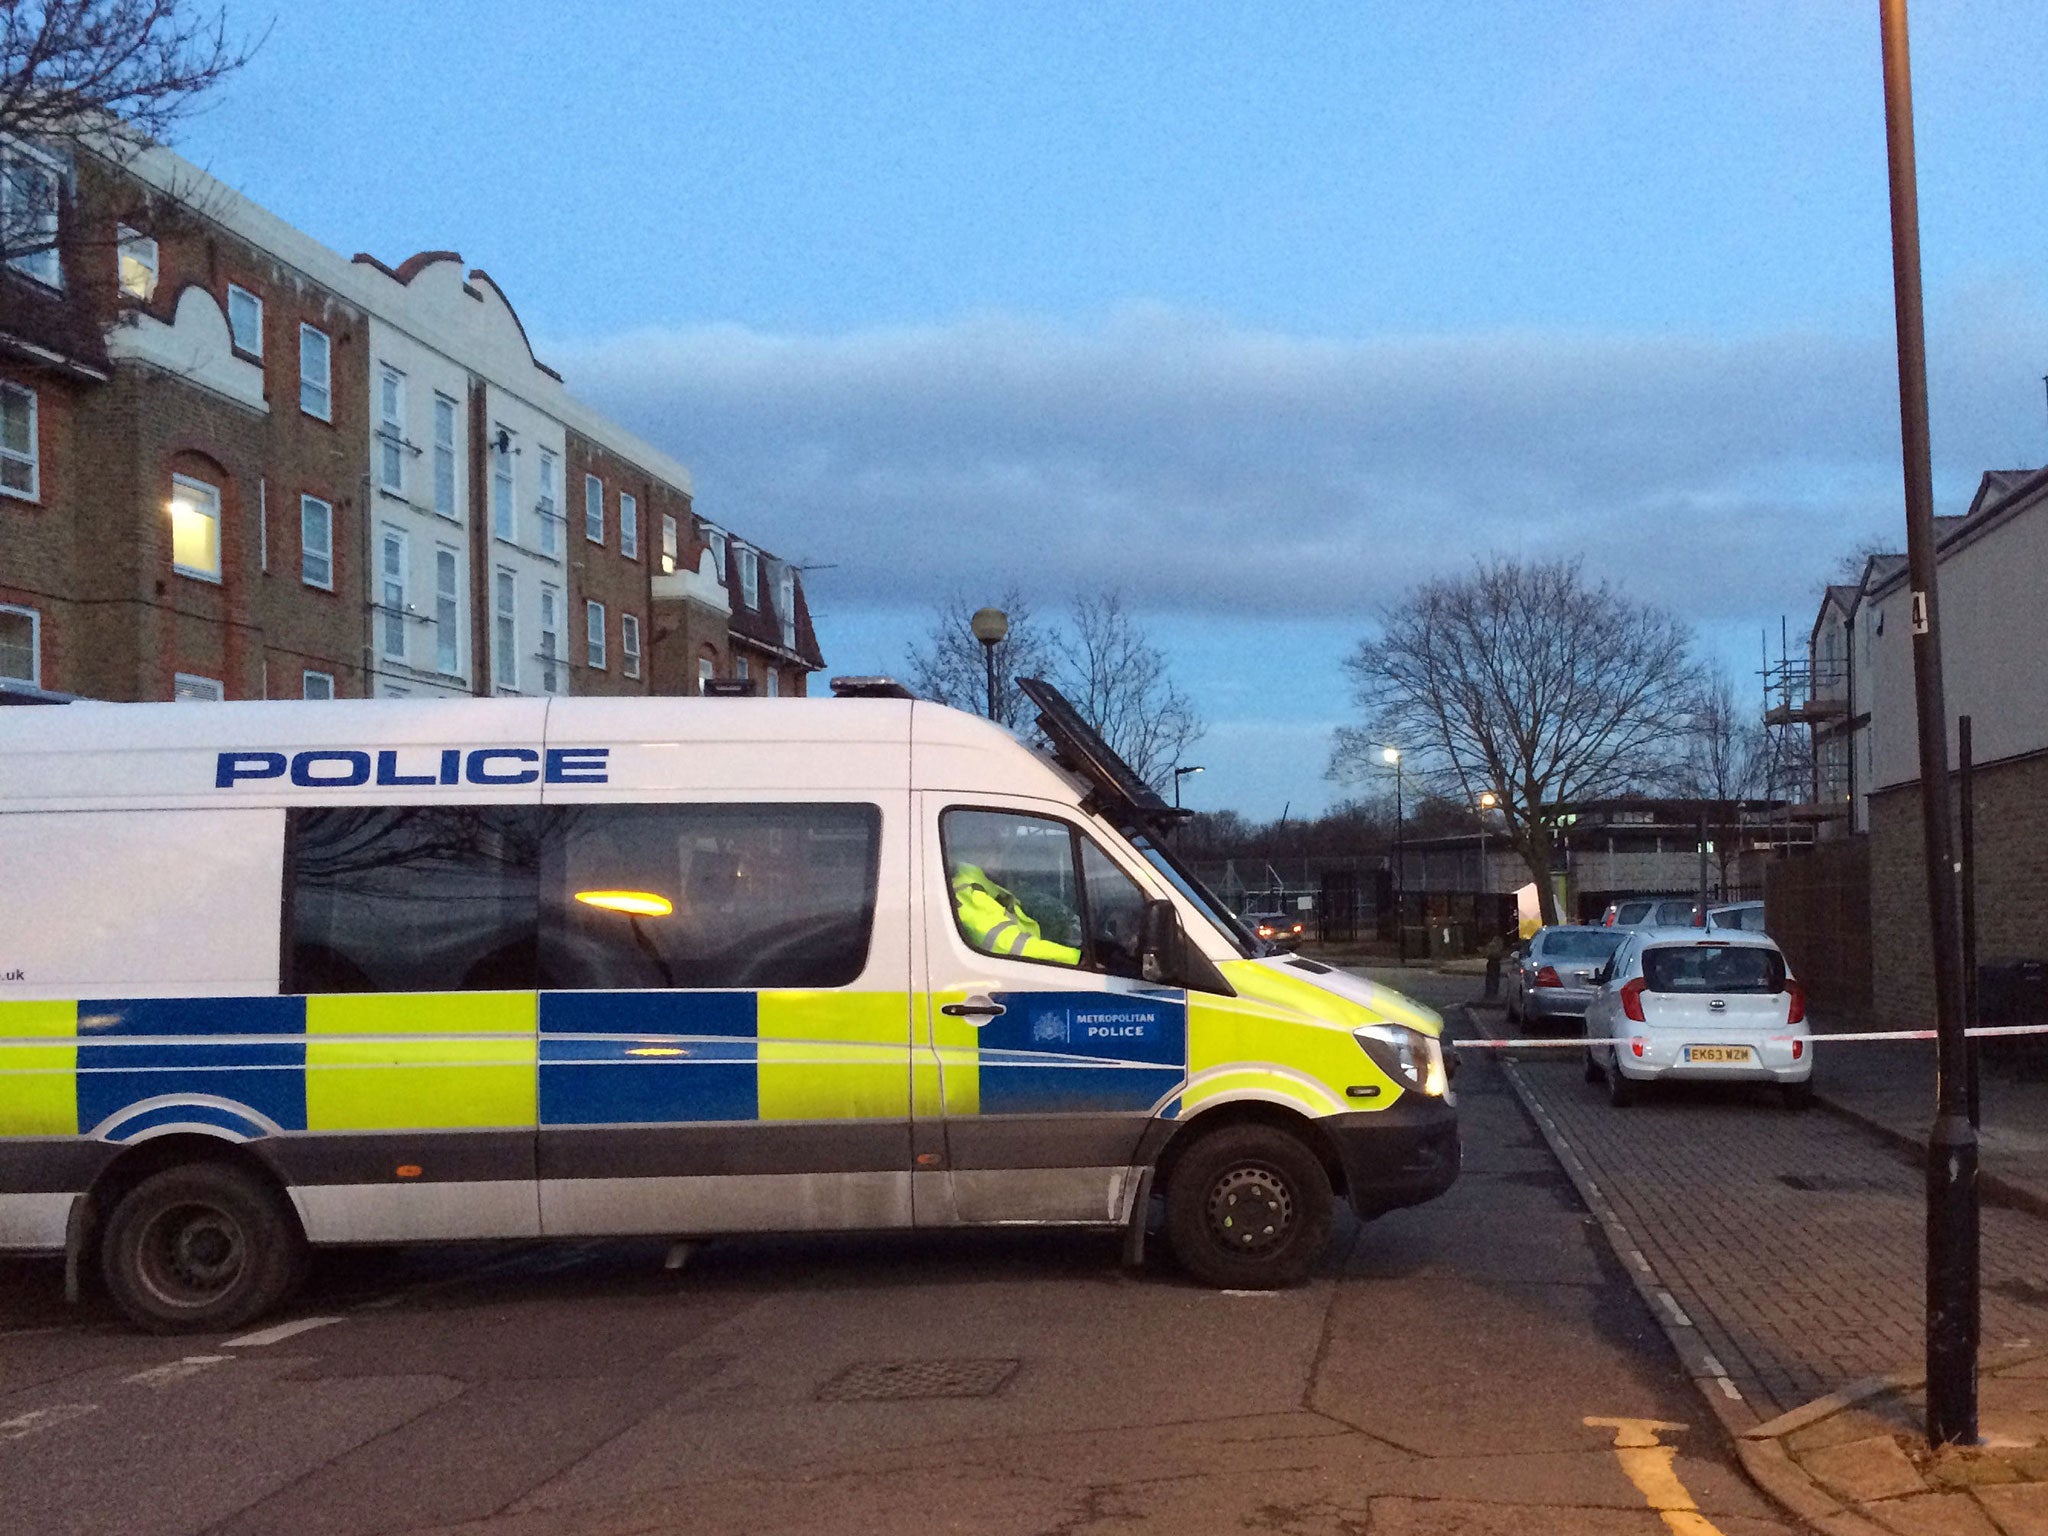 A police van on Memorial Avenue in West Ham, east London, near to the scene of a stabbing.